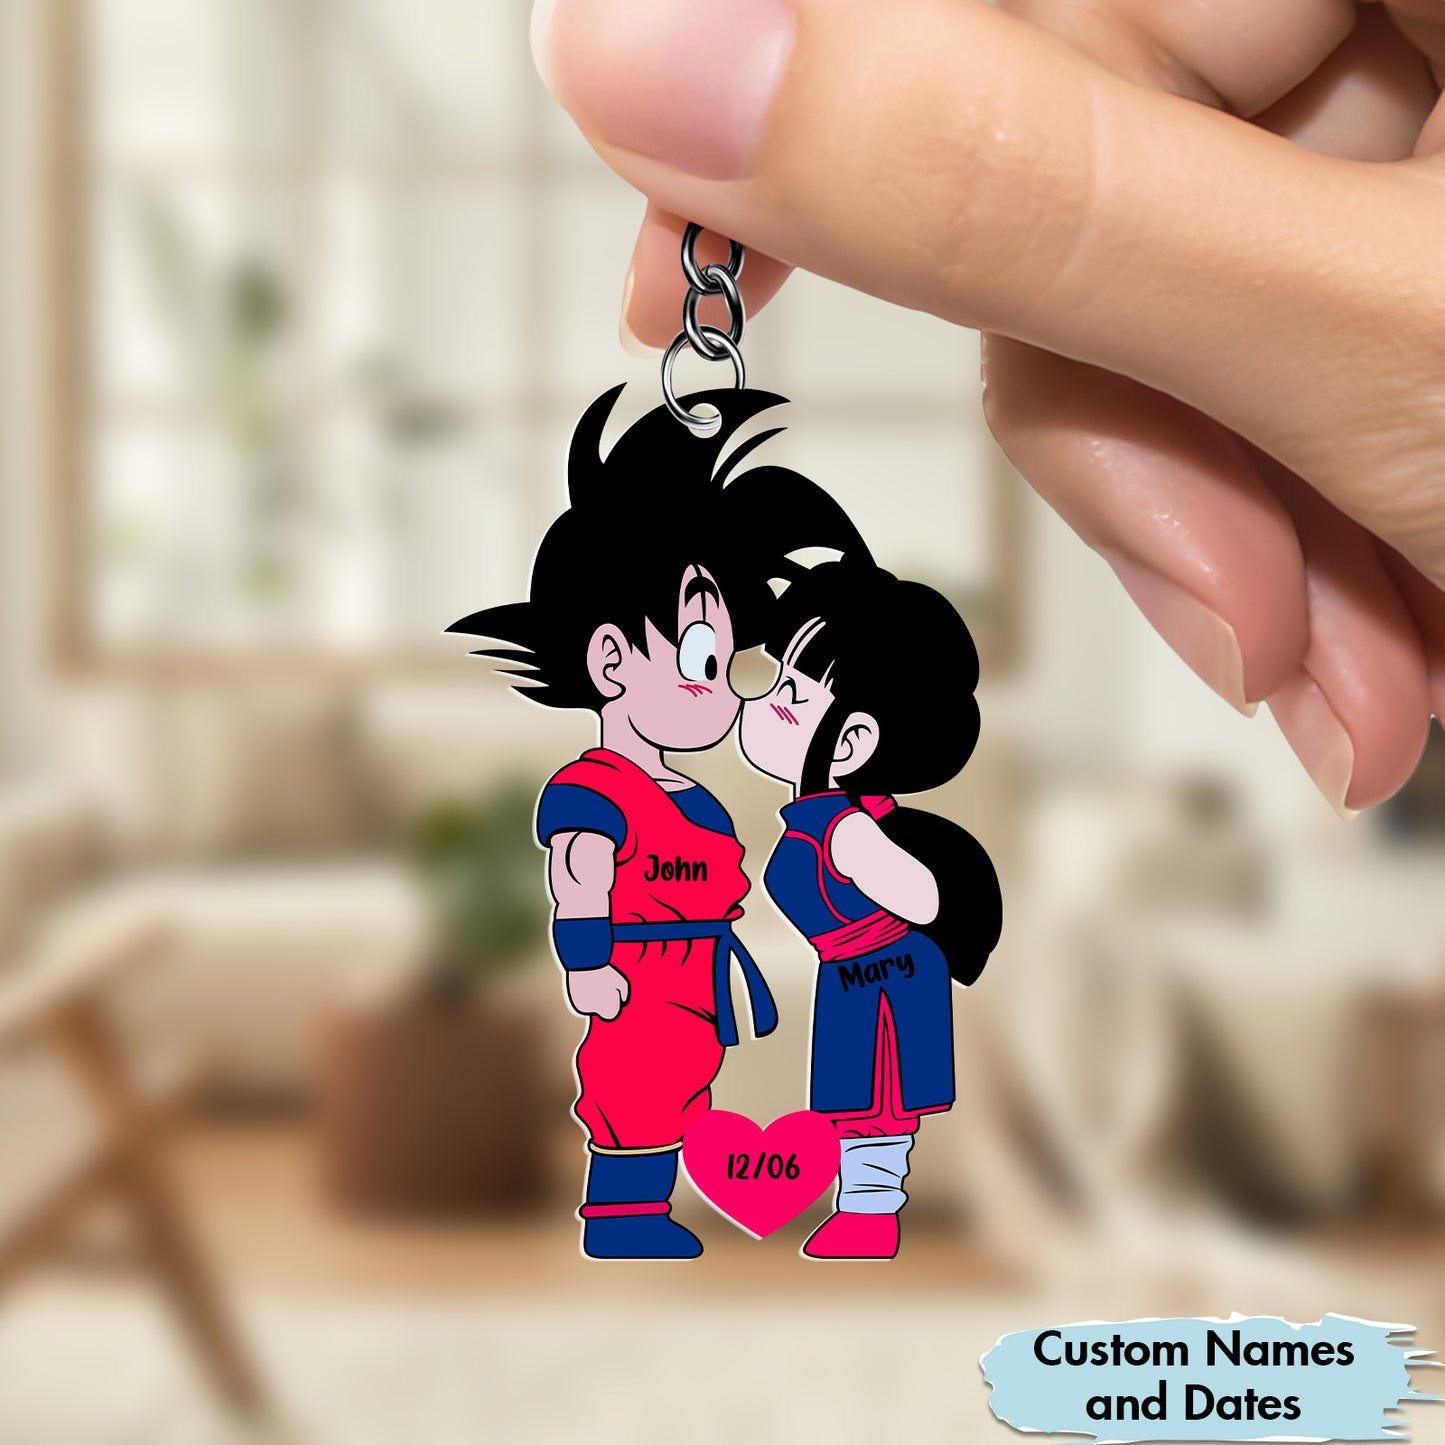 Couple - My Enchanted Heart - Personalized Keychain